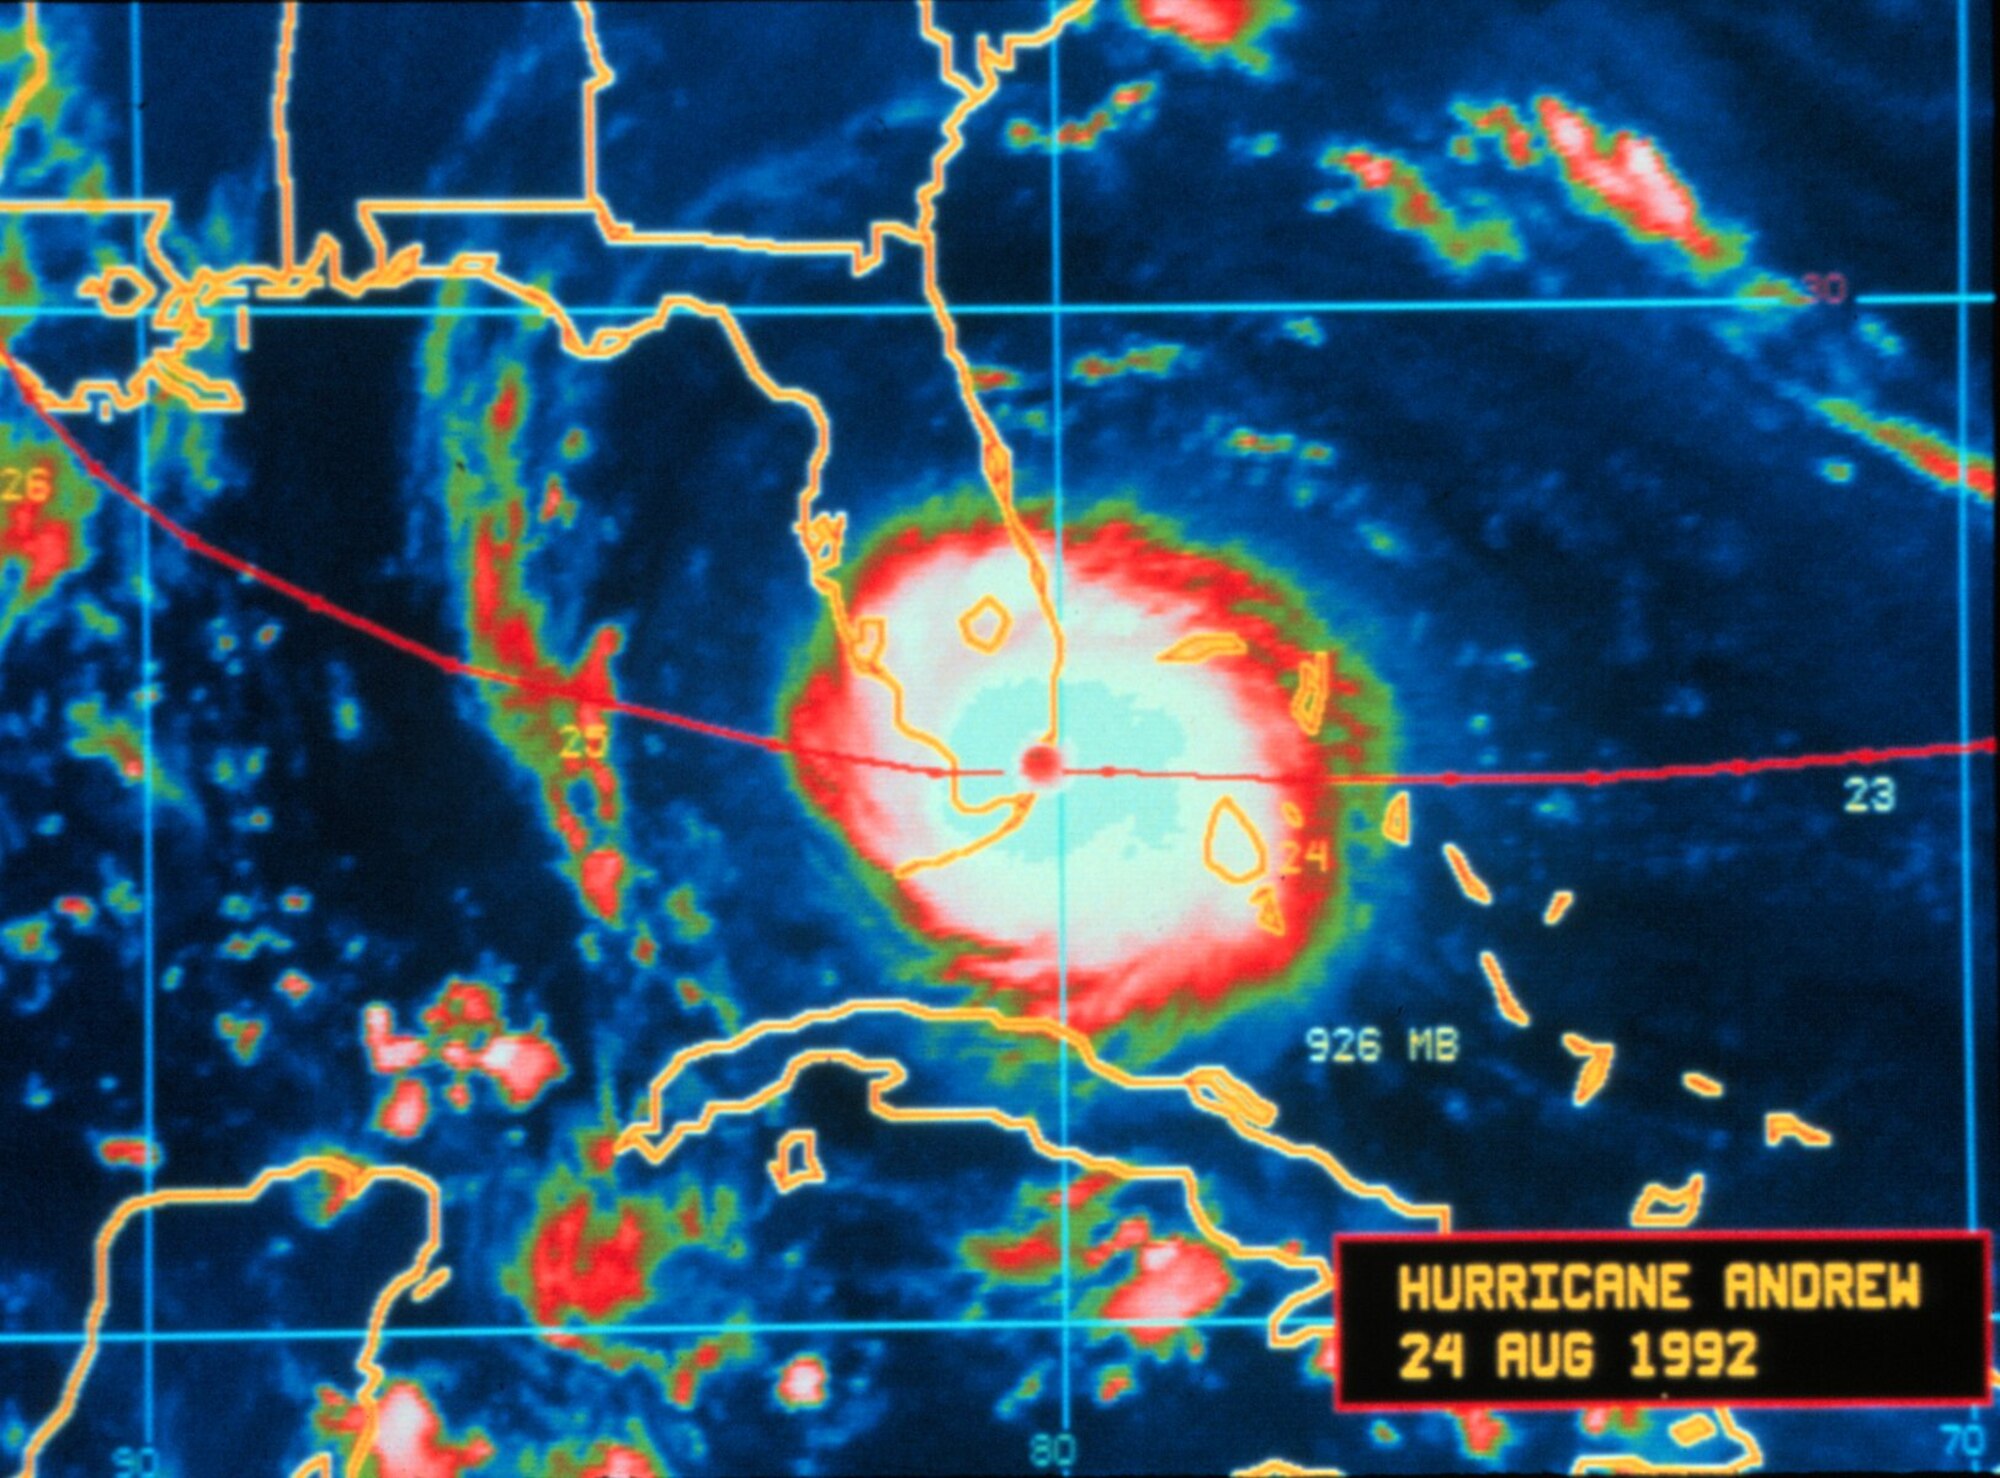 Hurricane Andrew over Homestead Air Force Base on August 24, 1992. (Photo courtesy of NOAA)